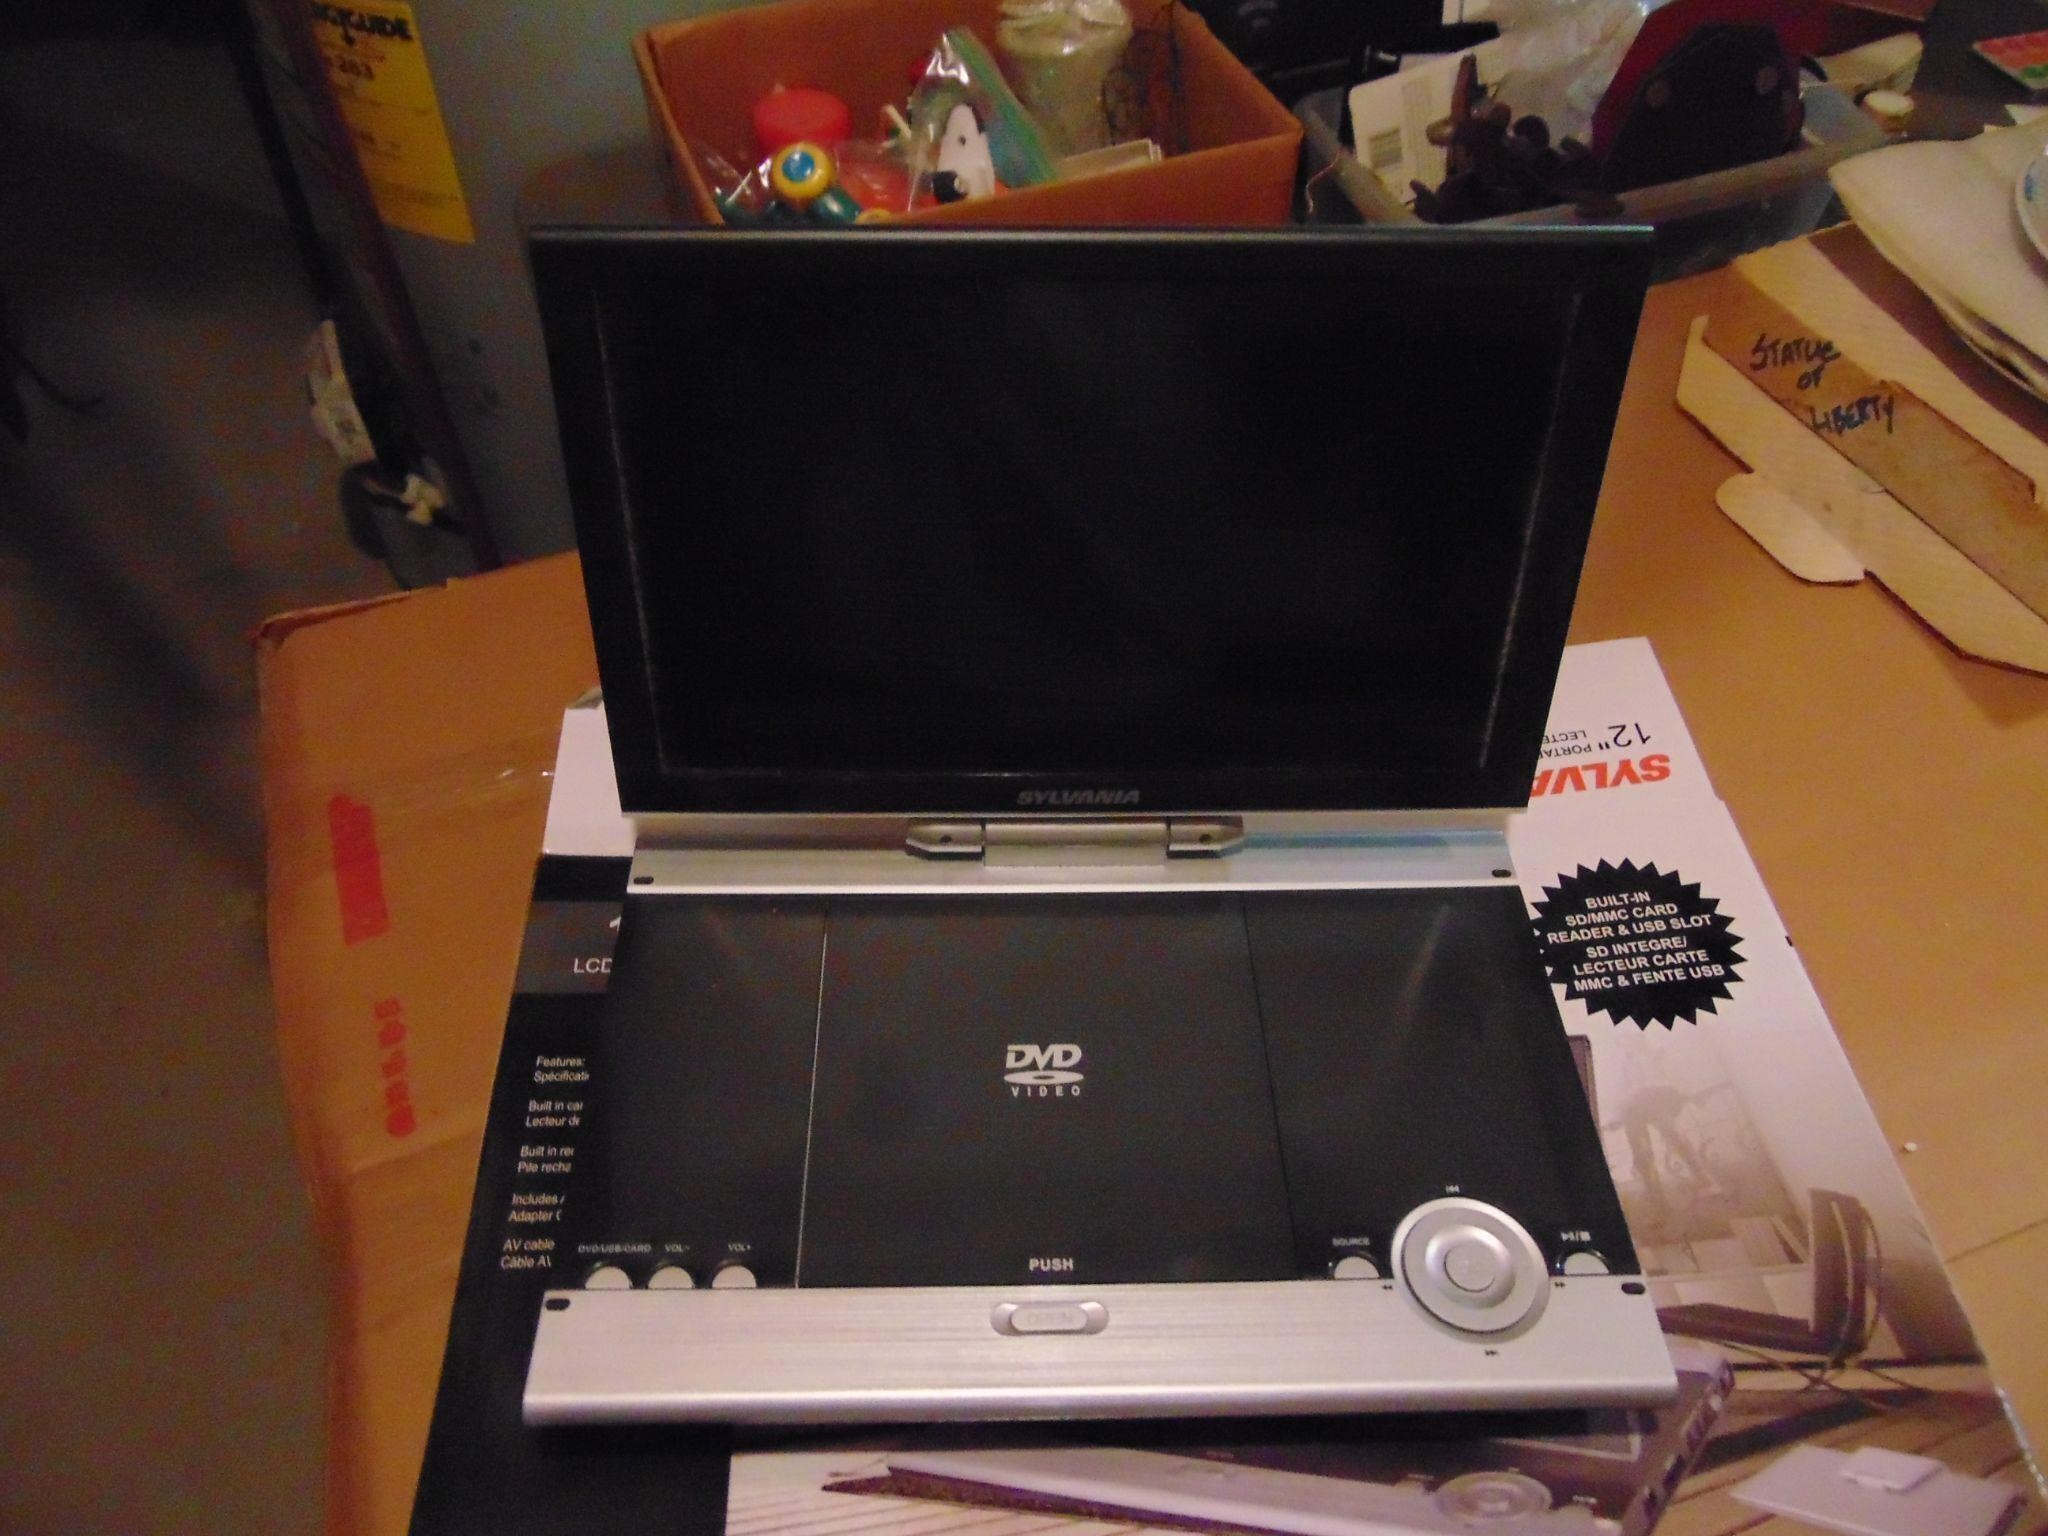 Small DVD player, no power cord, untested